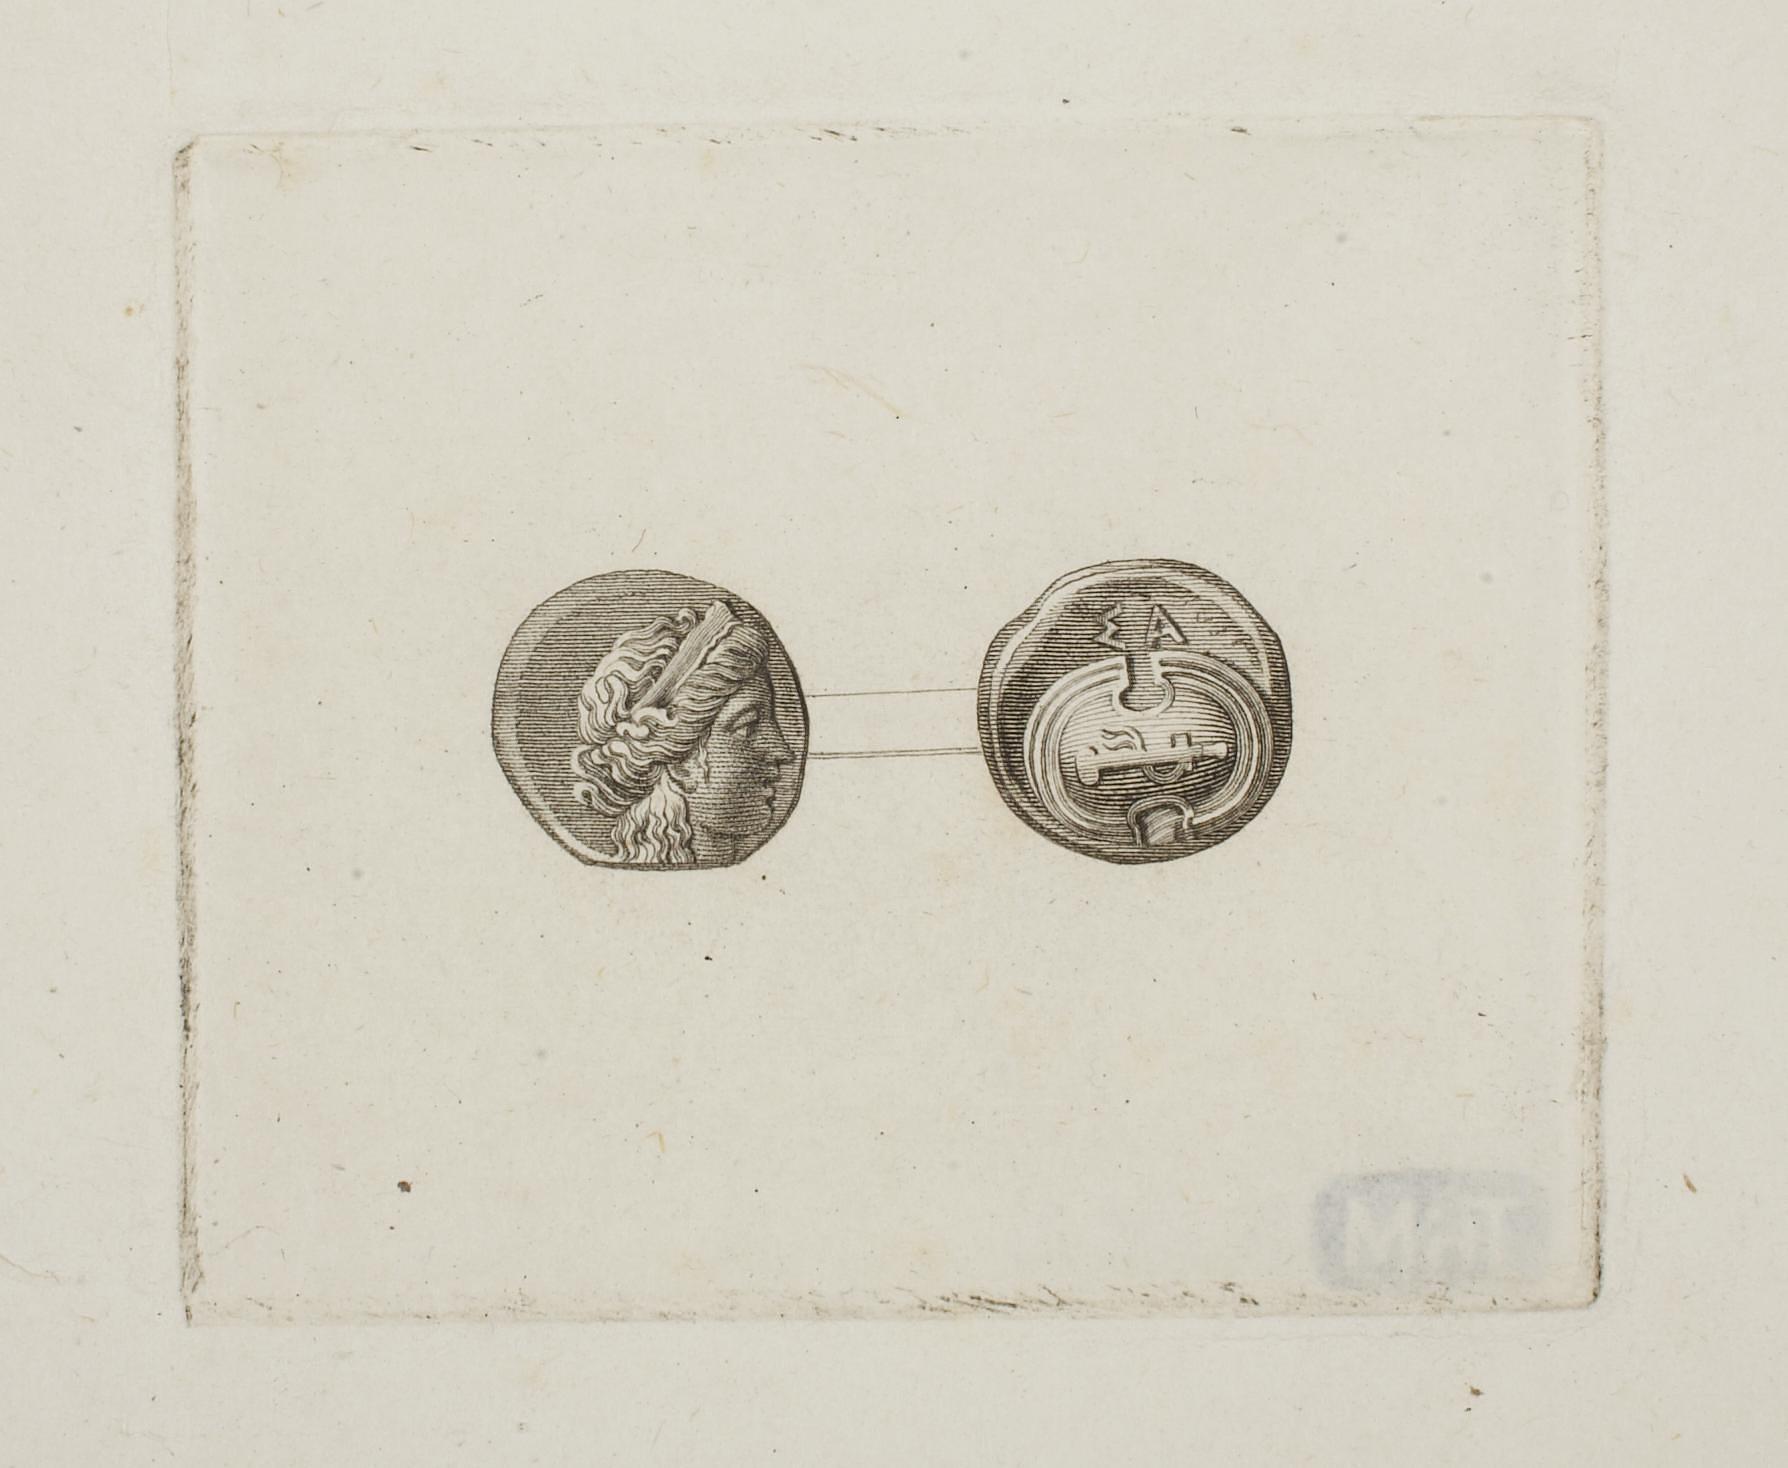 Greek coins obverse and reverse, E1552